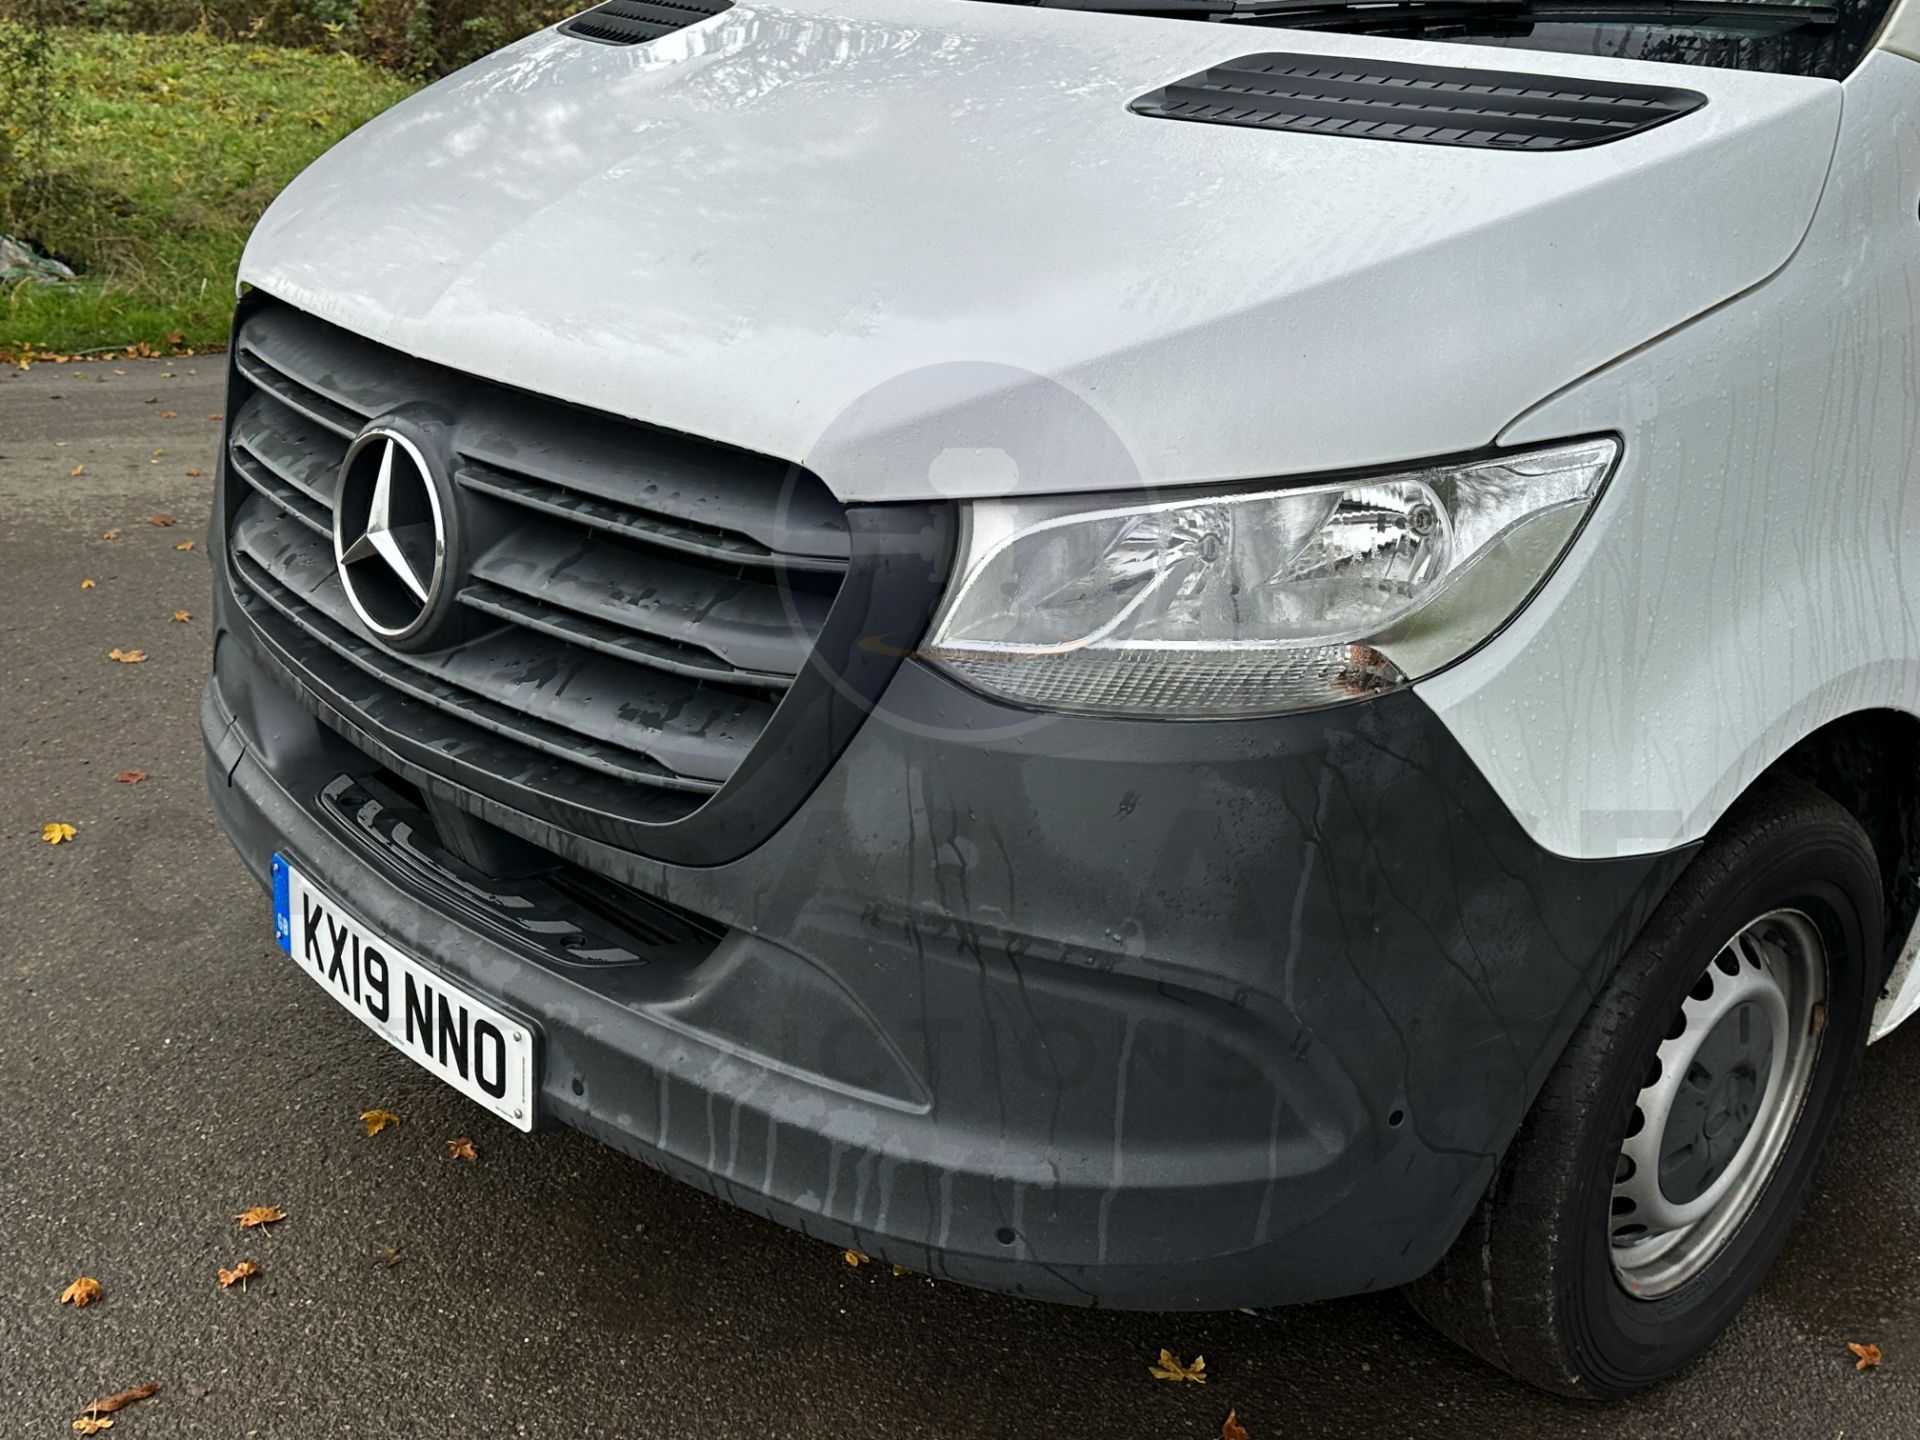 MERCEDES-BENZ SPRINTER 314 CDI *MWB - REFRIGERATED VAN* (2019 - FACELIFT MODEL) *OVERNIGHT STANDBY* - Image 6 of 45